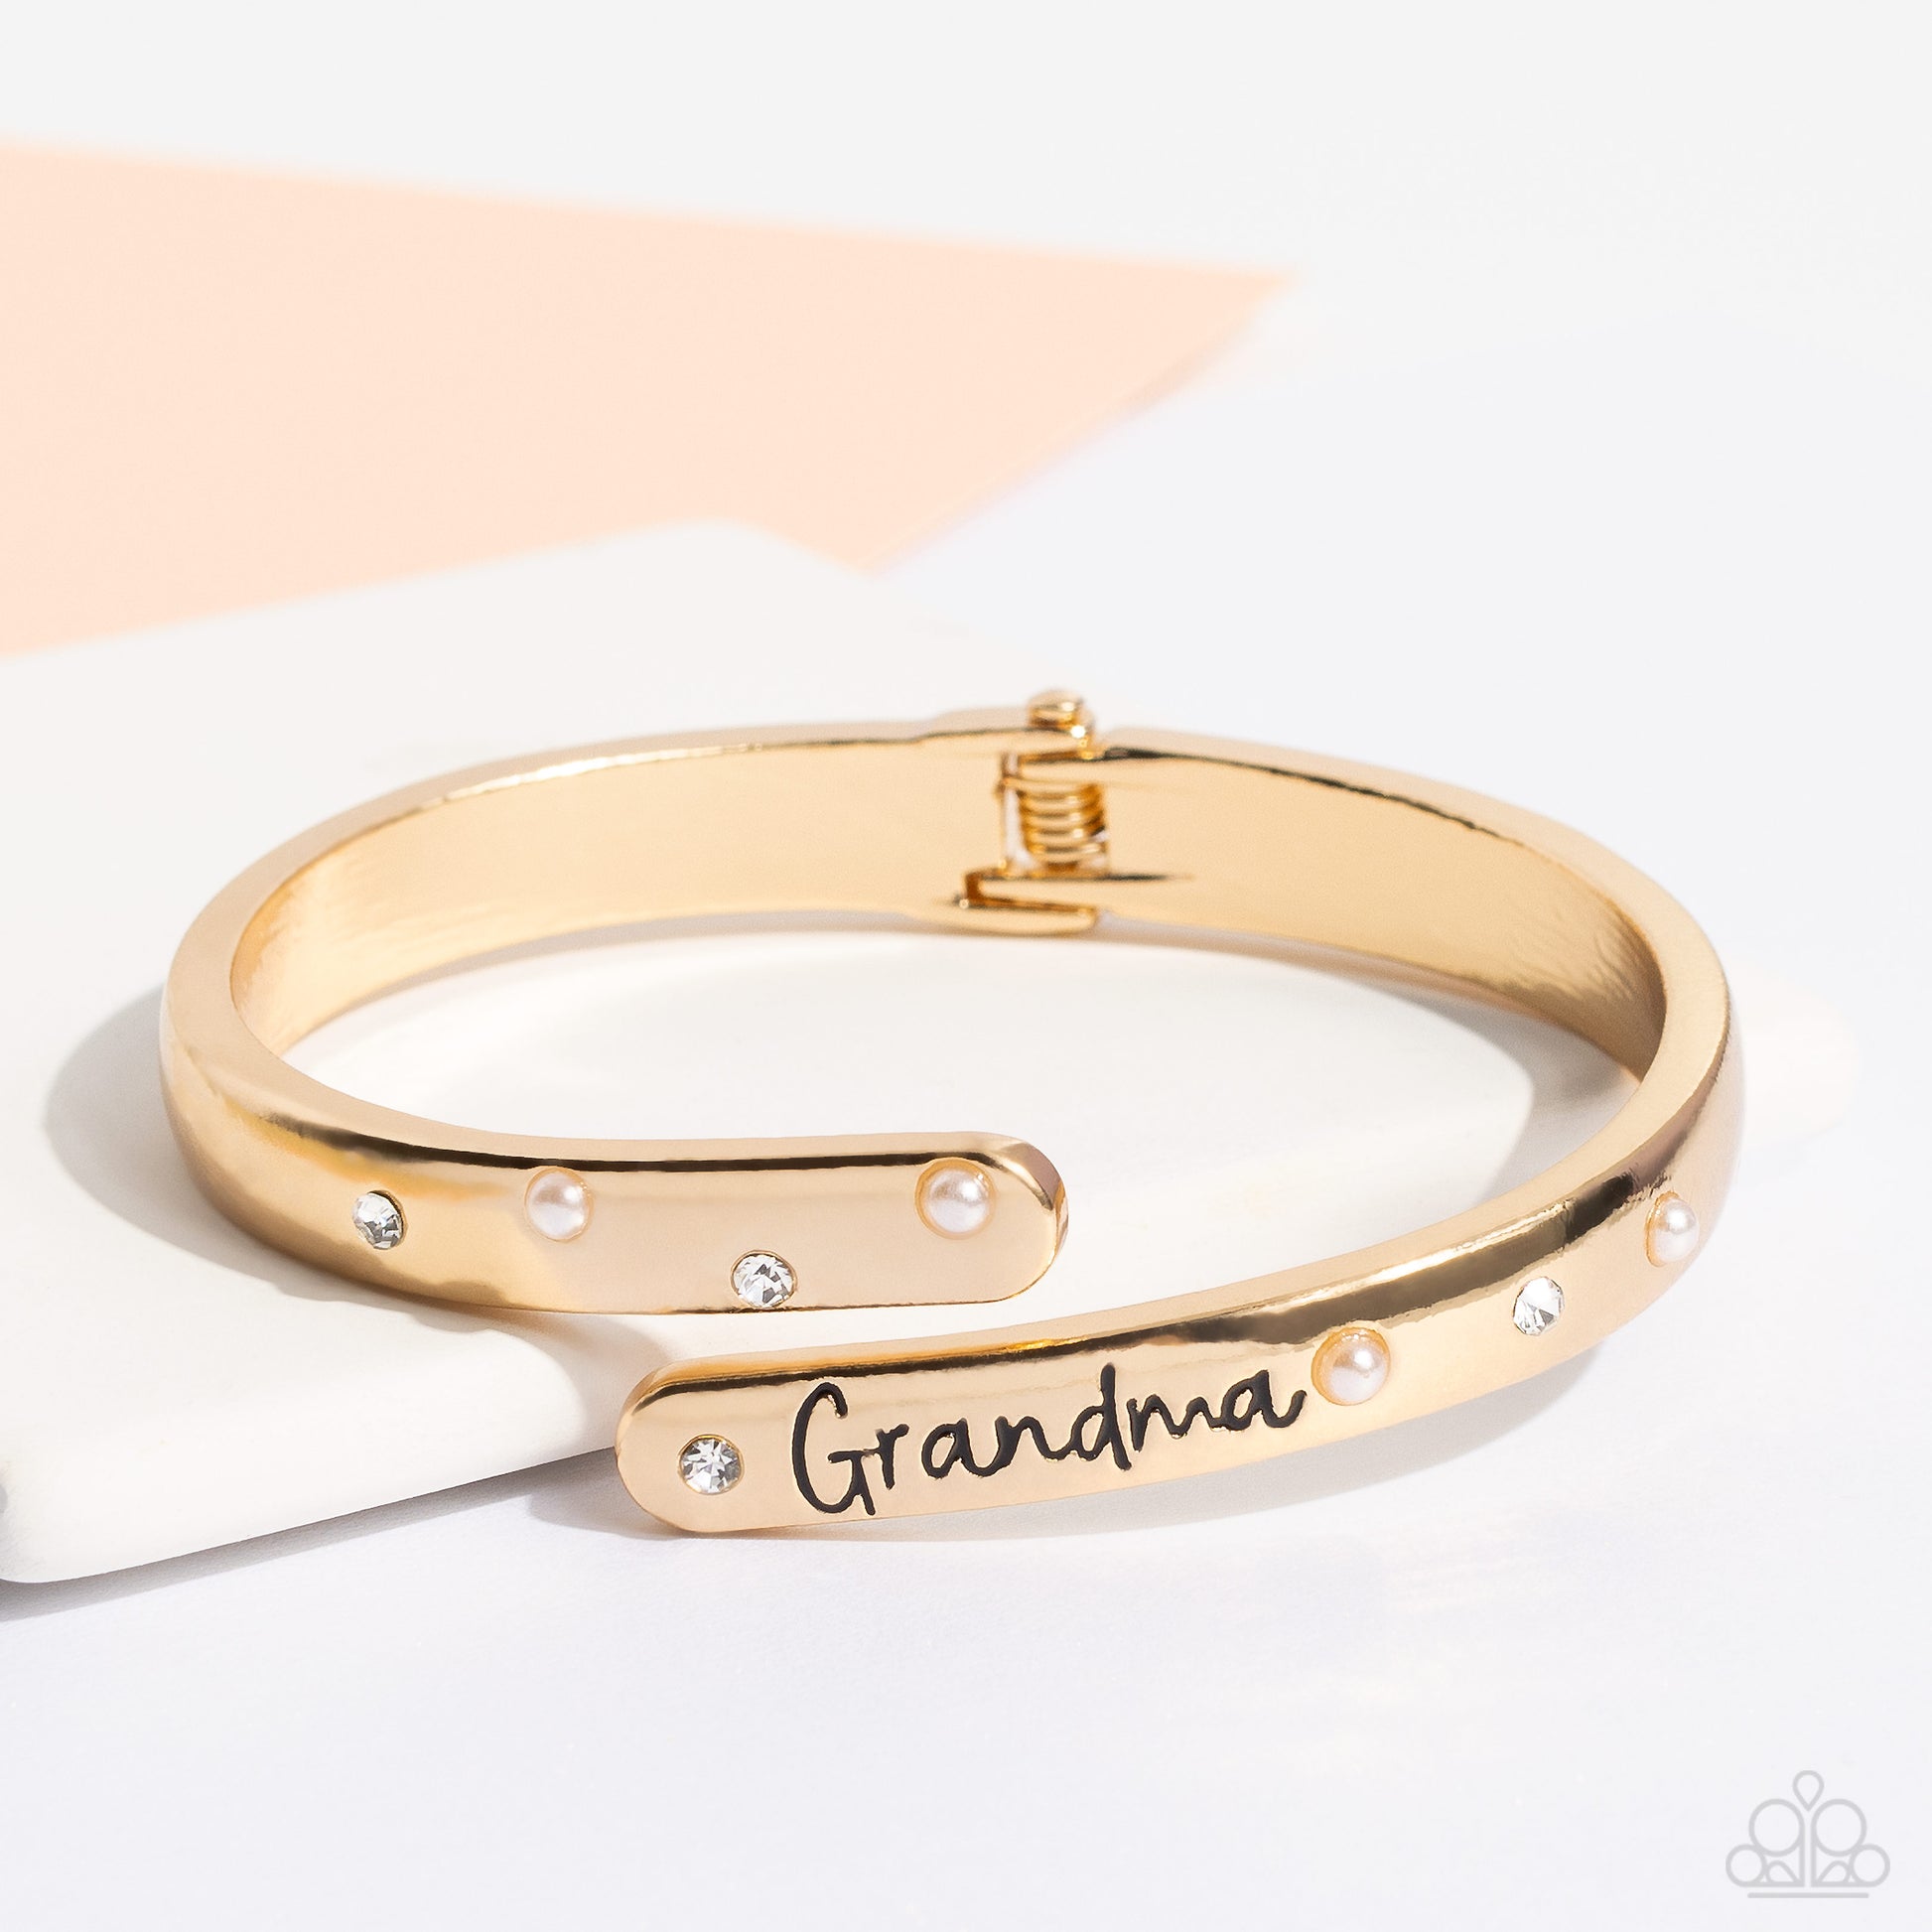 Gorgeous Grandma Gold Hinge Bracelet - Paparazzi Accessories  High-sheen gold curves into a hinged closure around the wrist. Featured on the upper curve, dainty pearls and white rhinestones alternate in a zig-zag pattern for a refined shimmer. The lower curve of gold features the stamped word "Grandma" in a curly font with rhinestones and pearls bordering the word for additional elegance. Features a hinged closure.  Sold as one individual bracelet.  P9WD-GDXX-191XX